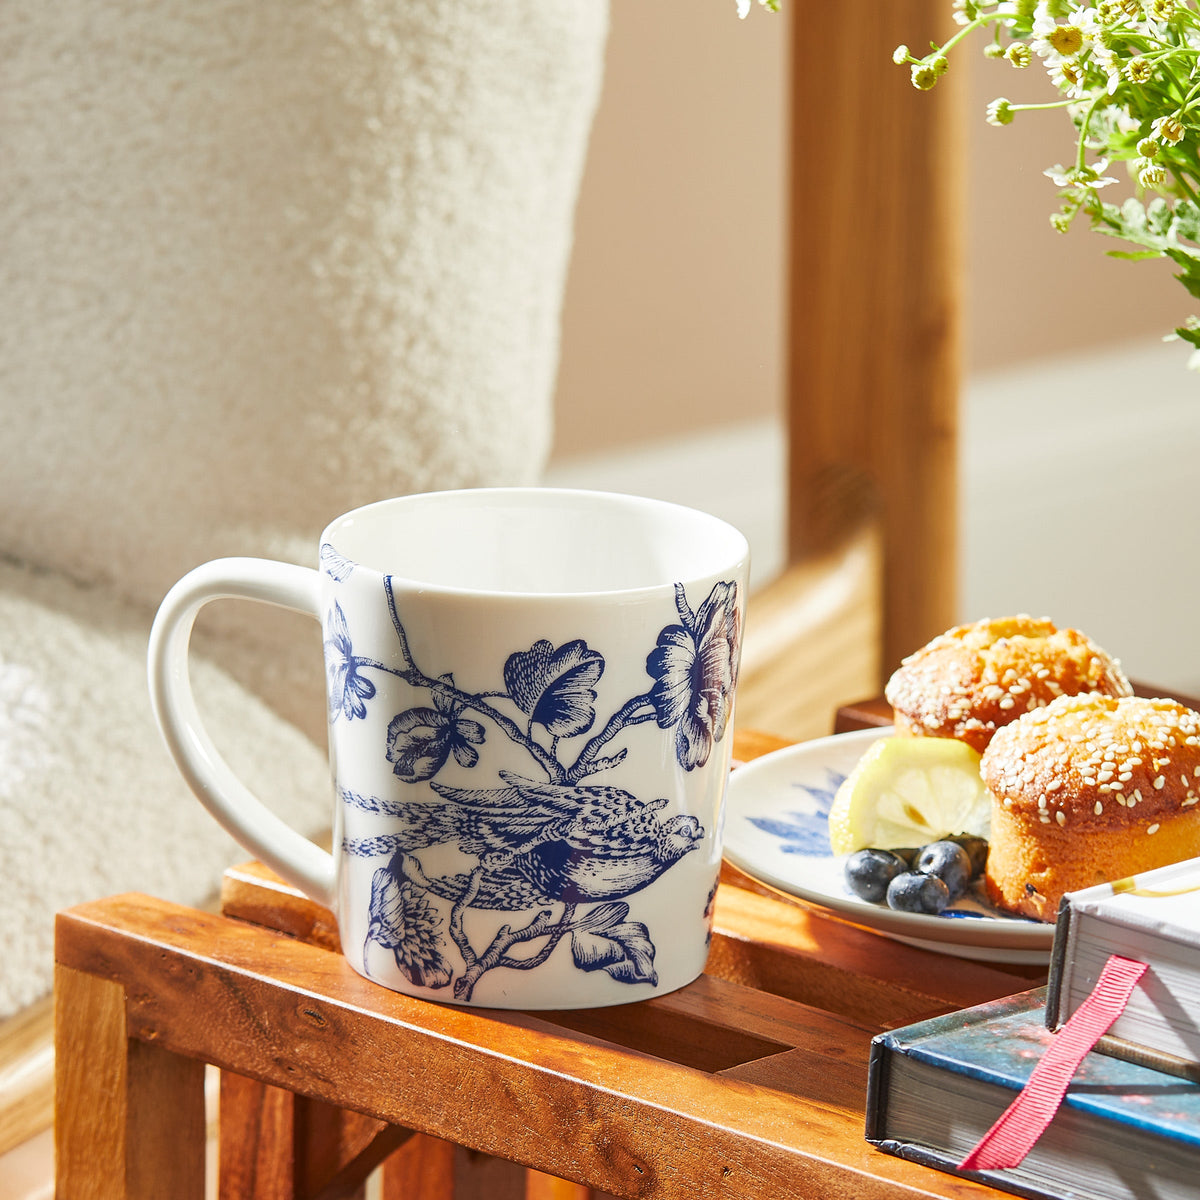 A **Chinoiserie Toile Mug** by **Caskata Artisanal Home**, embodying timeless elegance, sits on a wooden tray beside a plate of muffins, blueberries, and a slice of lemon. Nearby, there are several stacked books and a vase with green foliage.